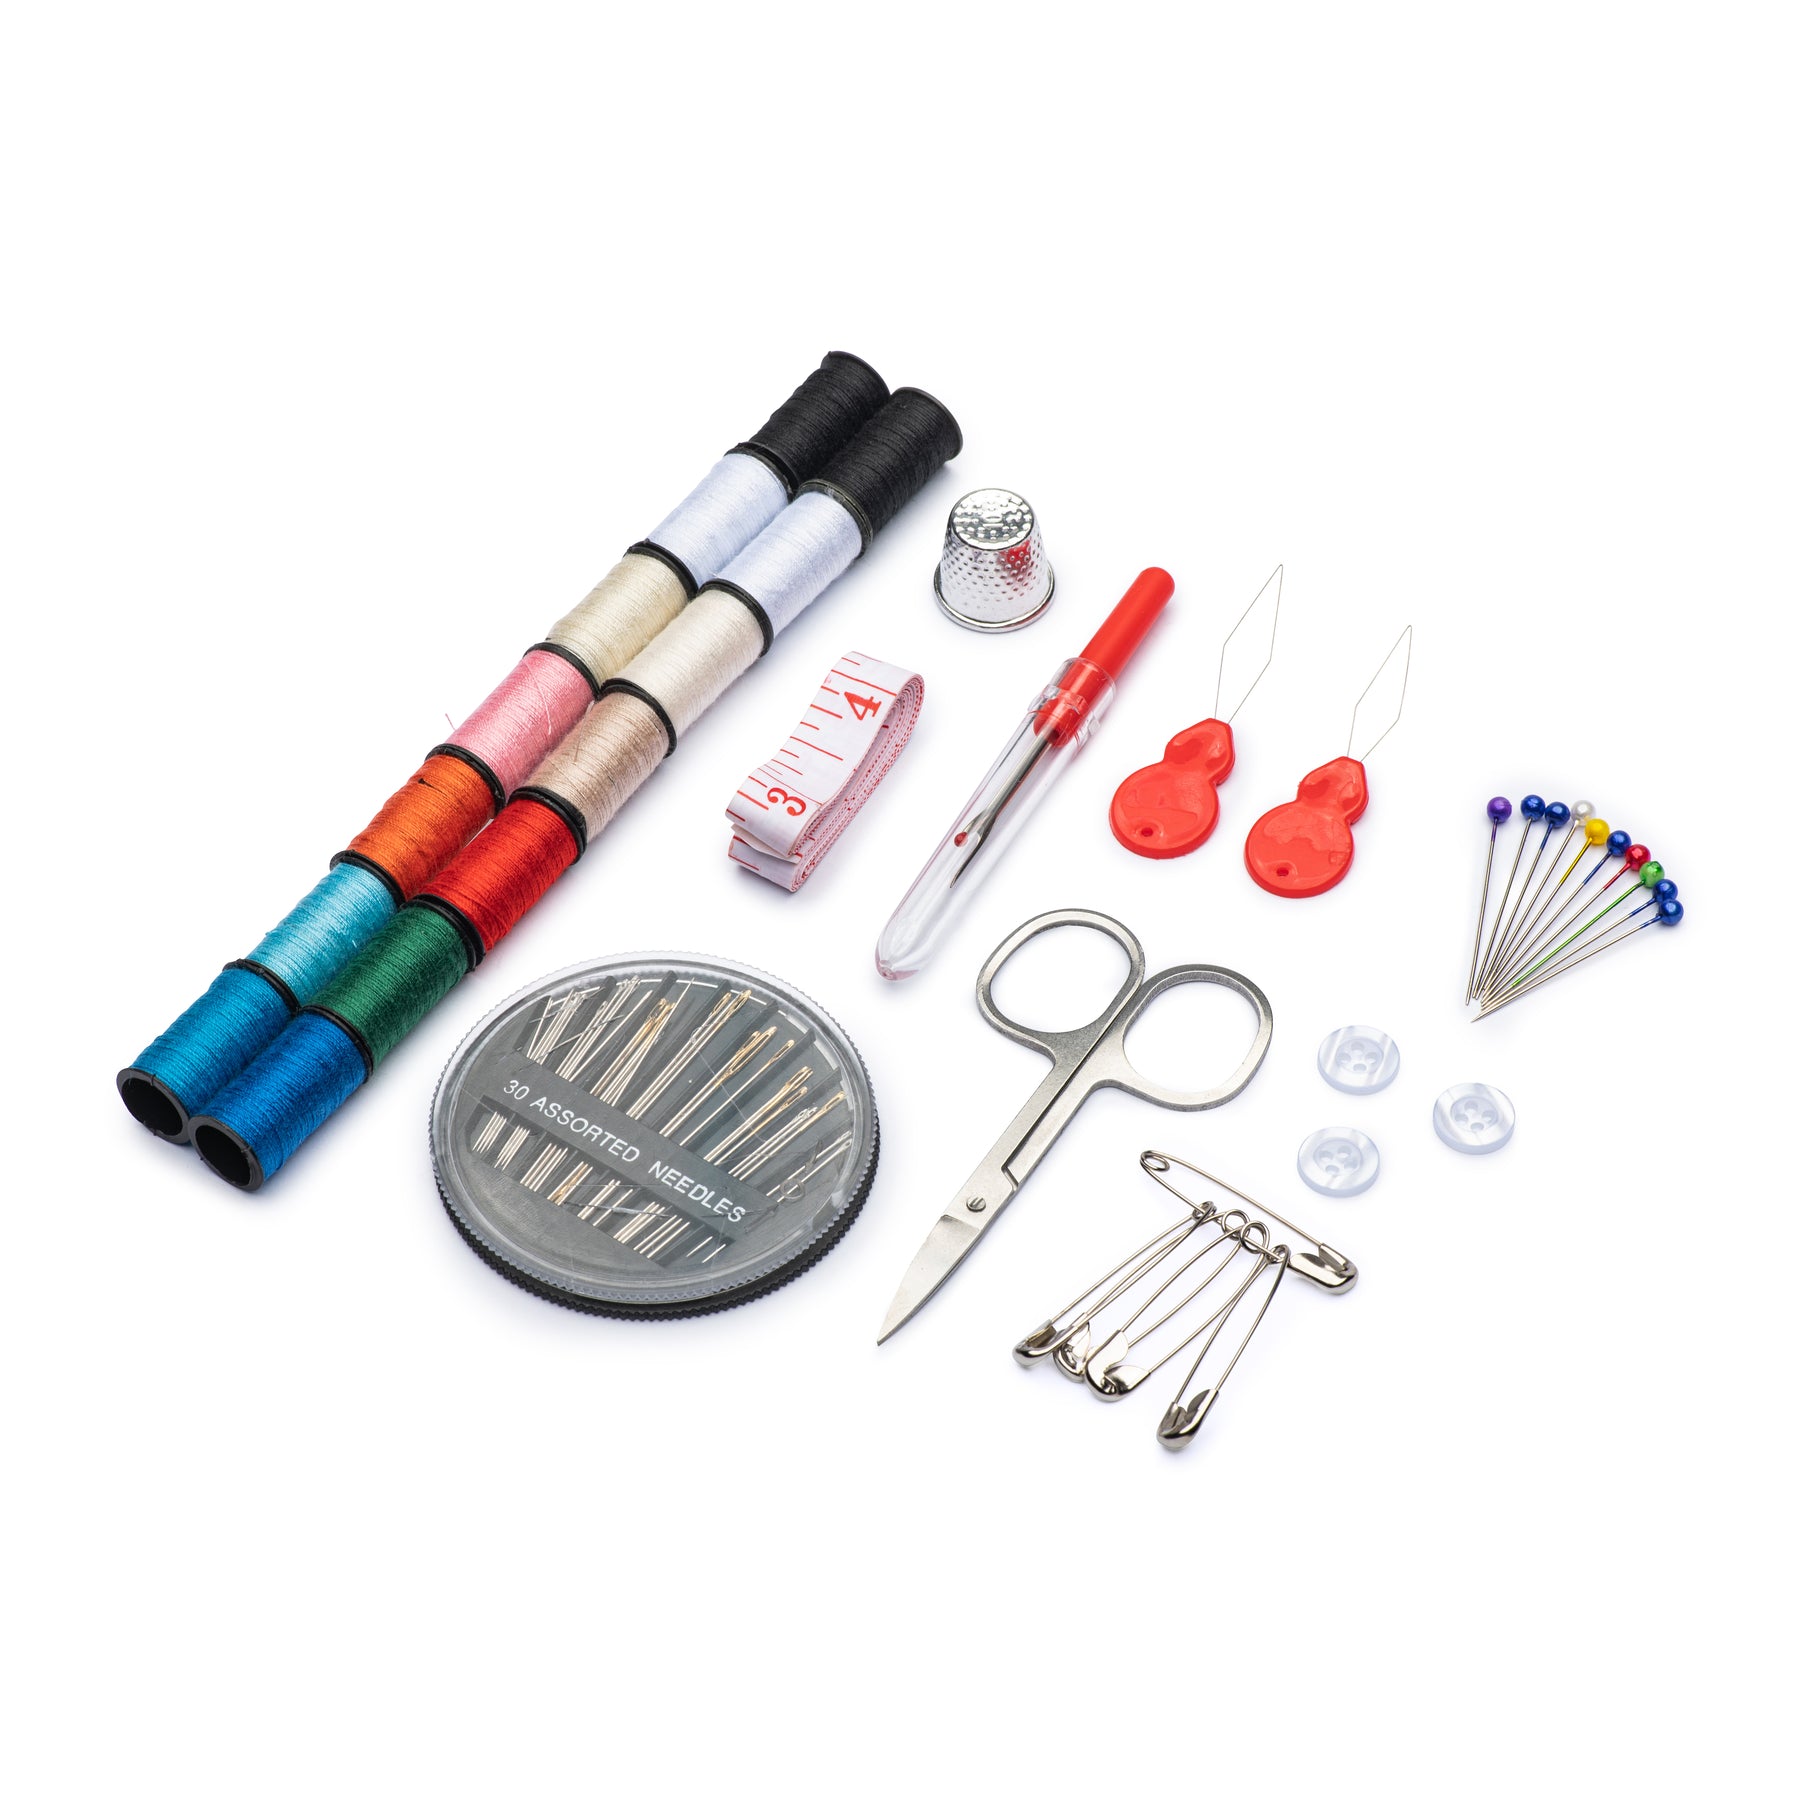 Trusew Sewing Small Kit